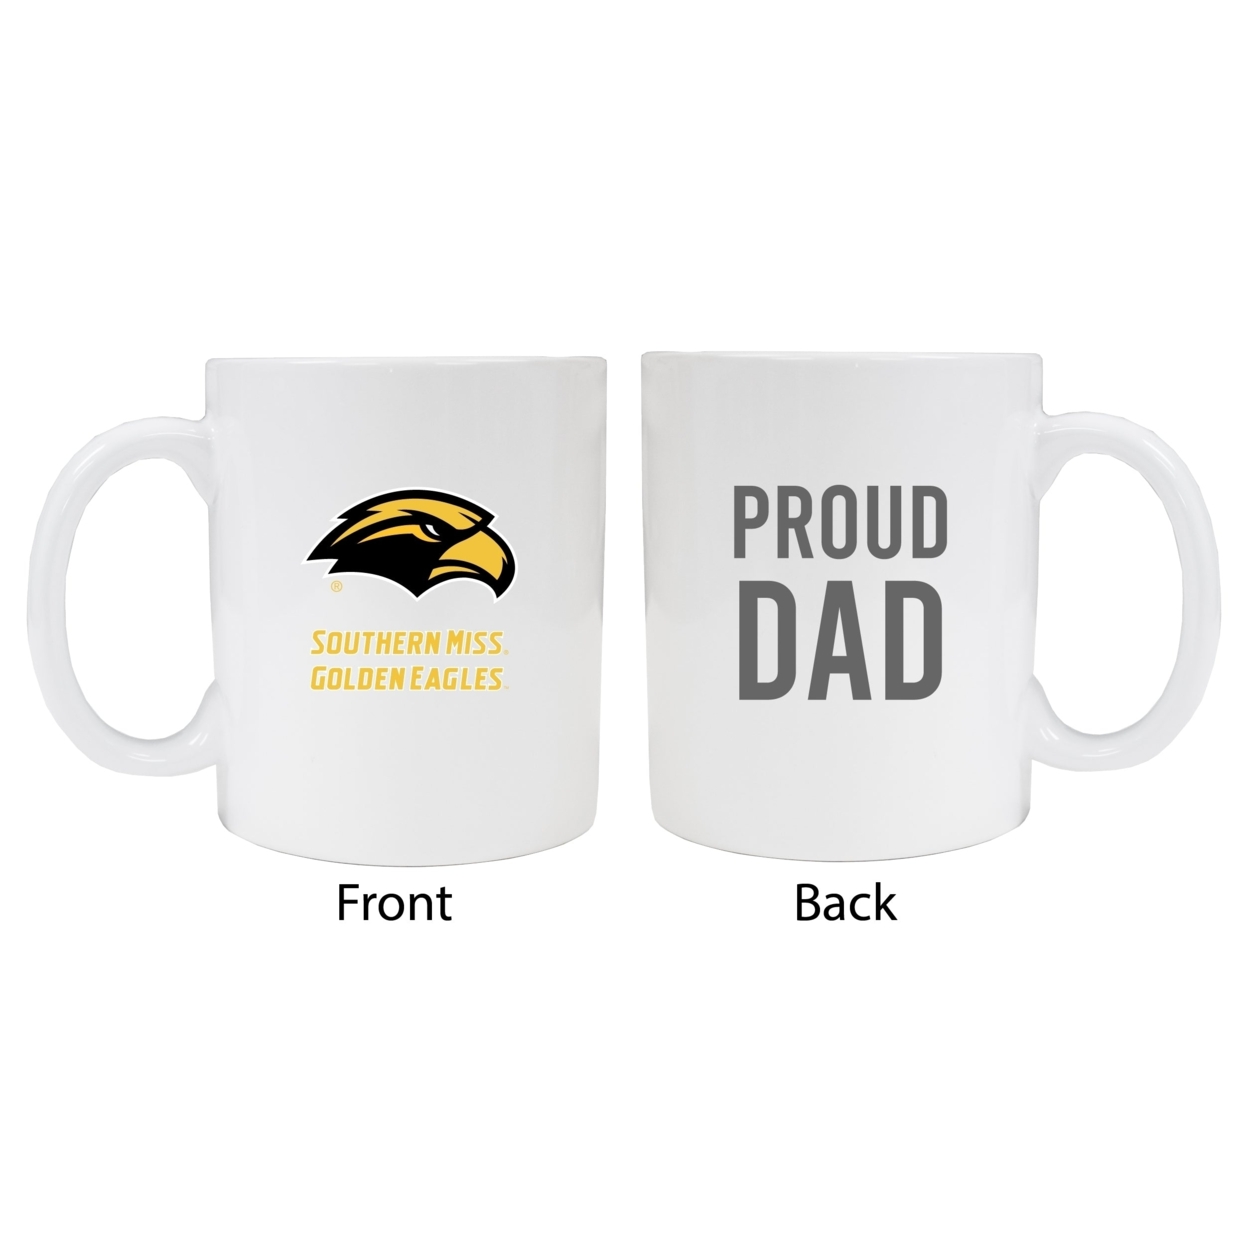 Southern Mississippi Golden Eagles Proud Dad Ceramic Coffee Mug - White